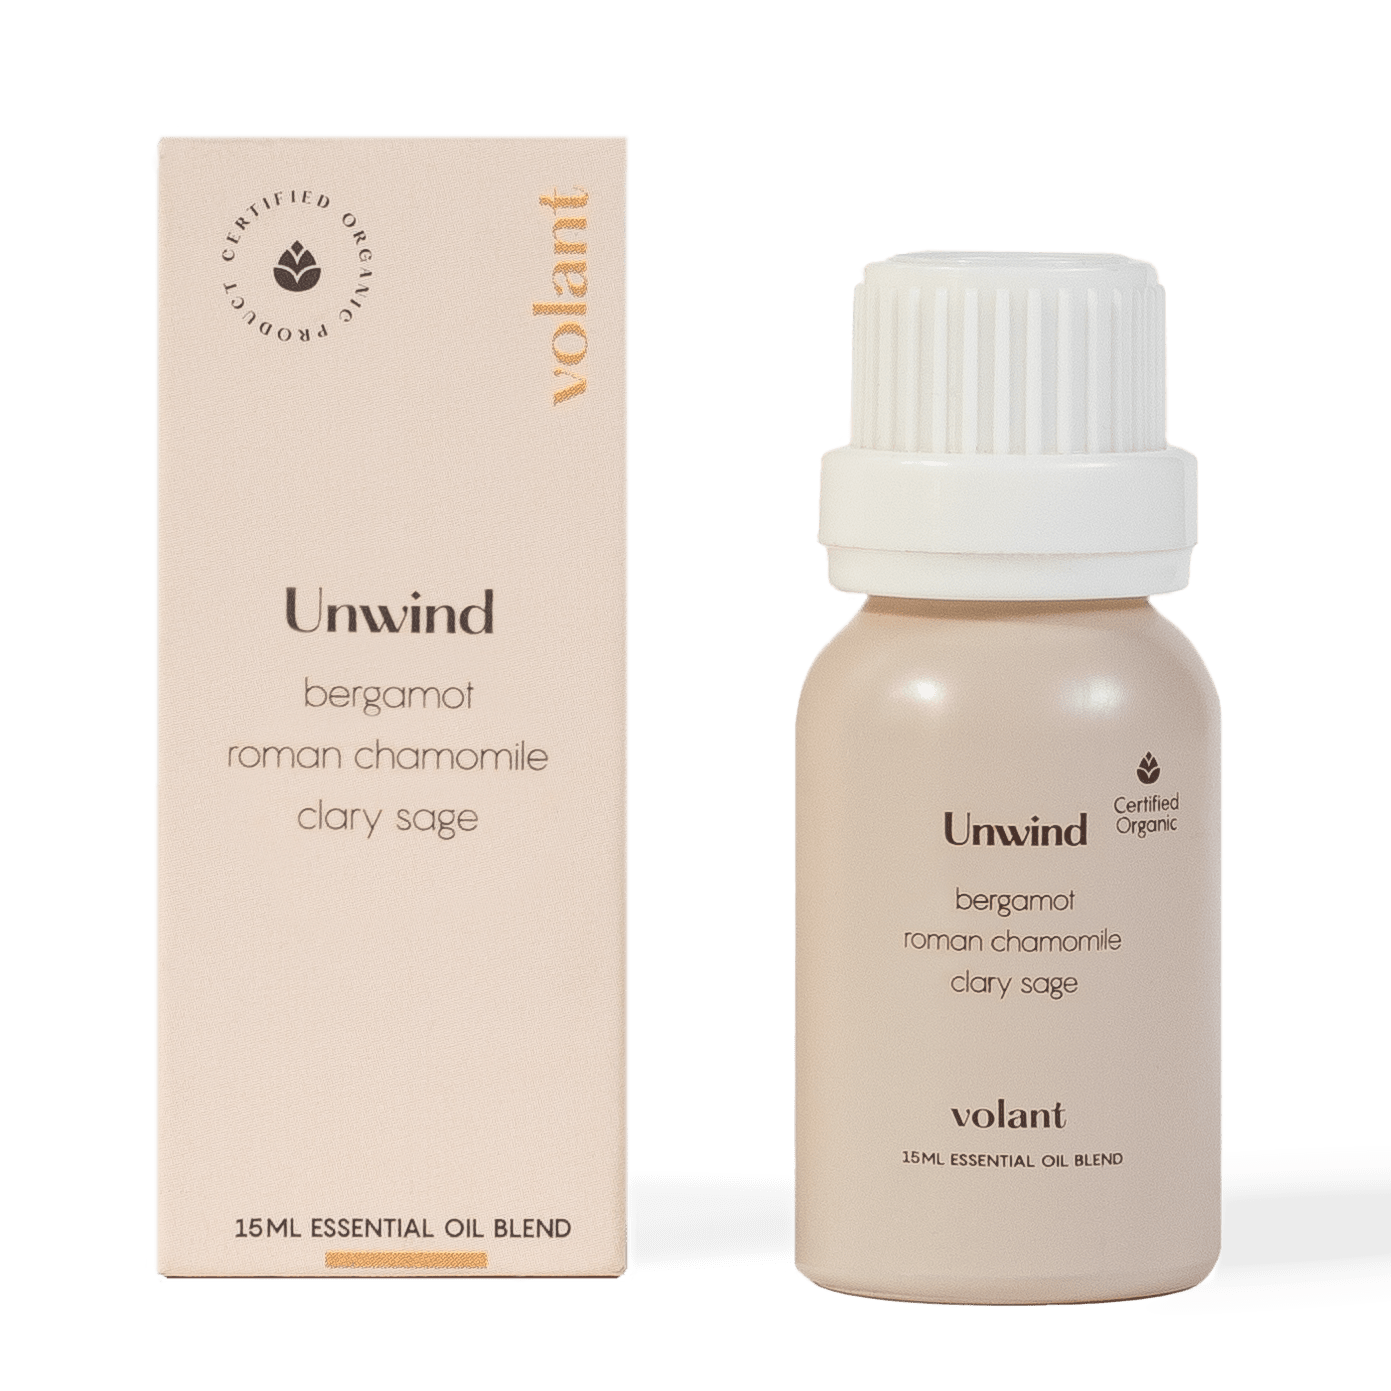 volant unwind essential oil blend bottle packaging. This is a mix of Clary Sage, Roman Chamomile, and Bergamot is perfect for the end of a busy stressful day.